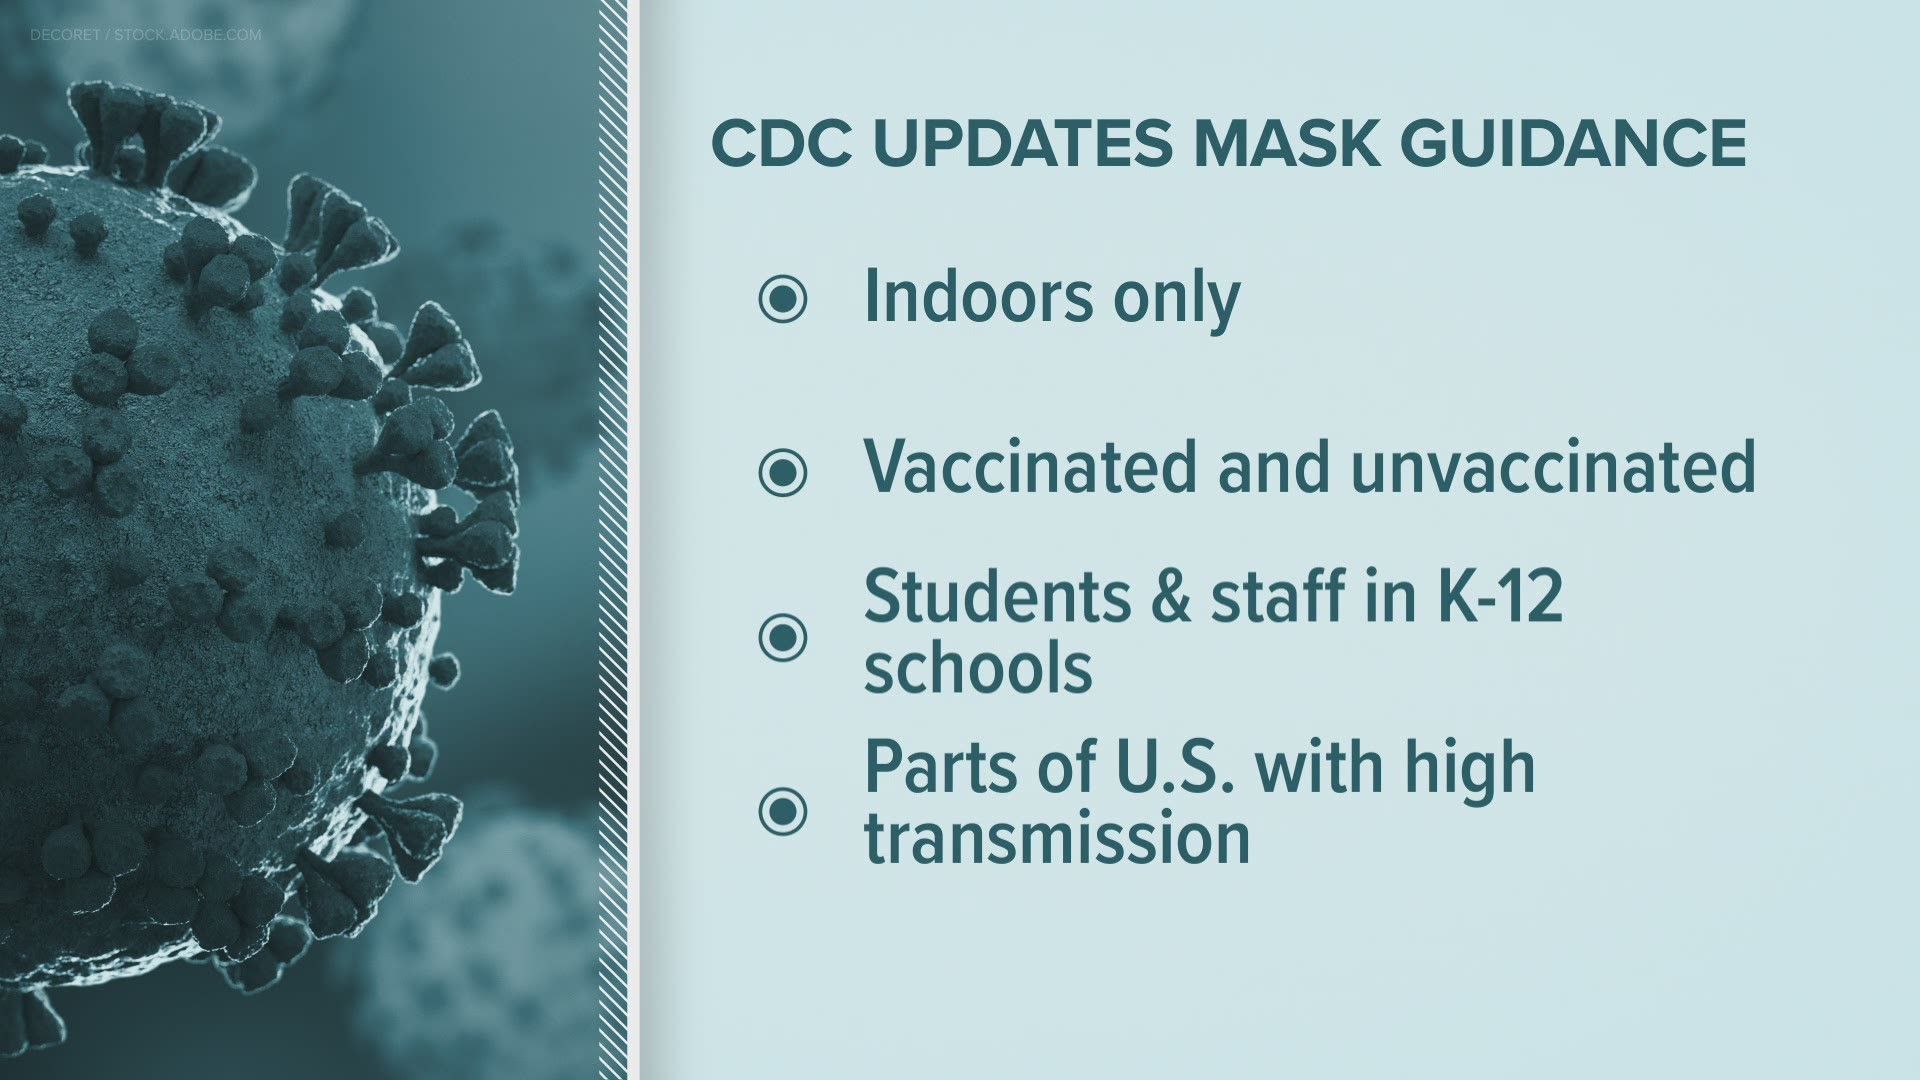 The CDC is particularly encouraging people who are in areas with high transmission to wear masks indoors, regardless of whether or not they've been vaccinated.